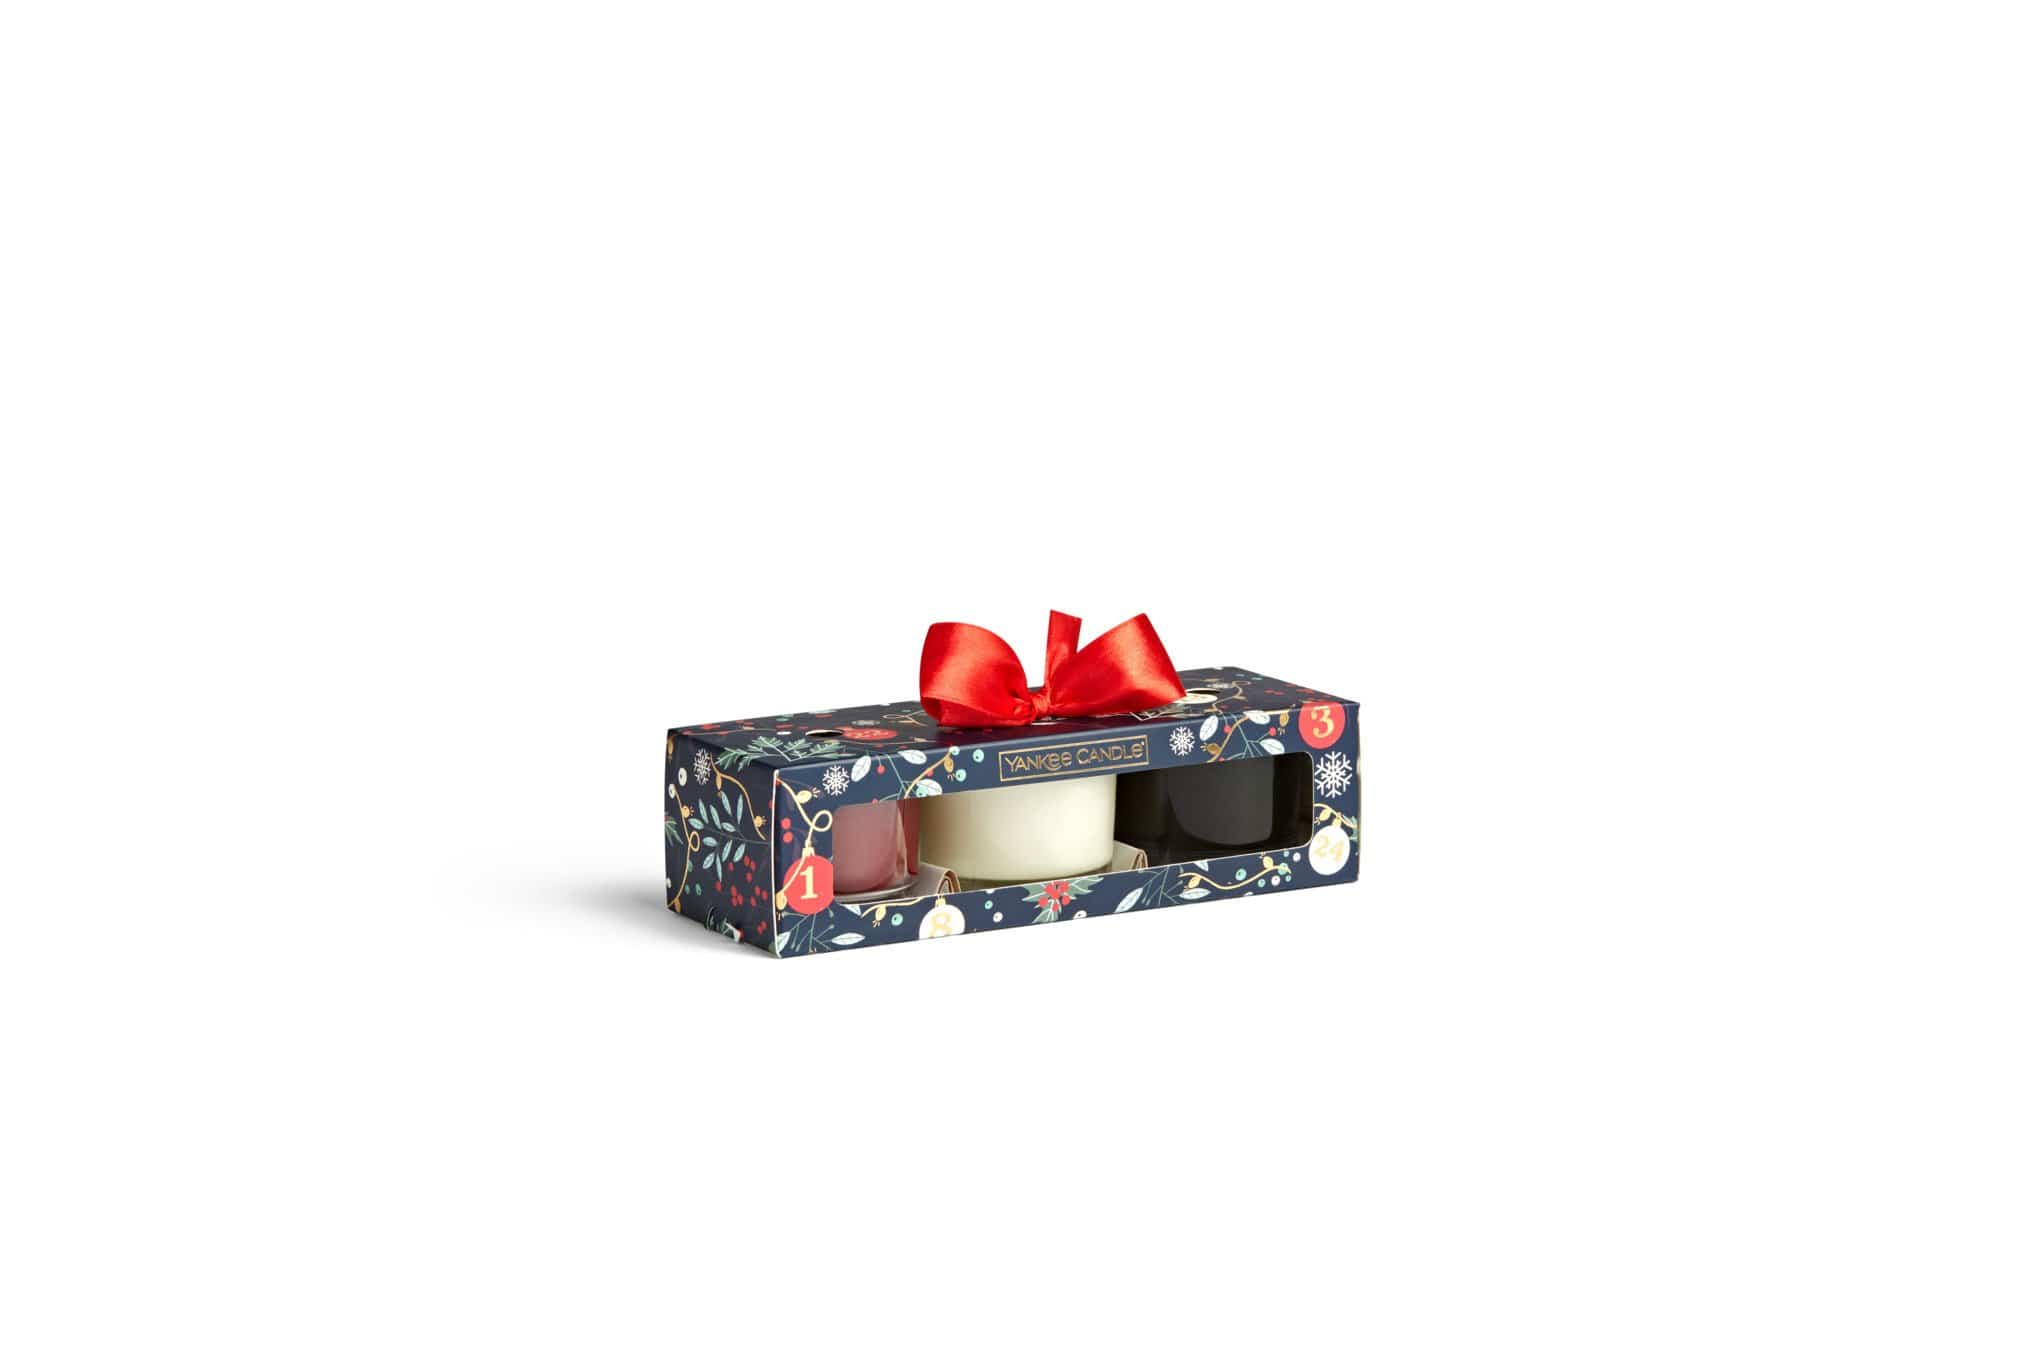 Yankee Candle Gift Set Yankee Candle Countdown to Christmas Gift Set - 3 Signature Filled Votives